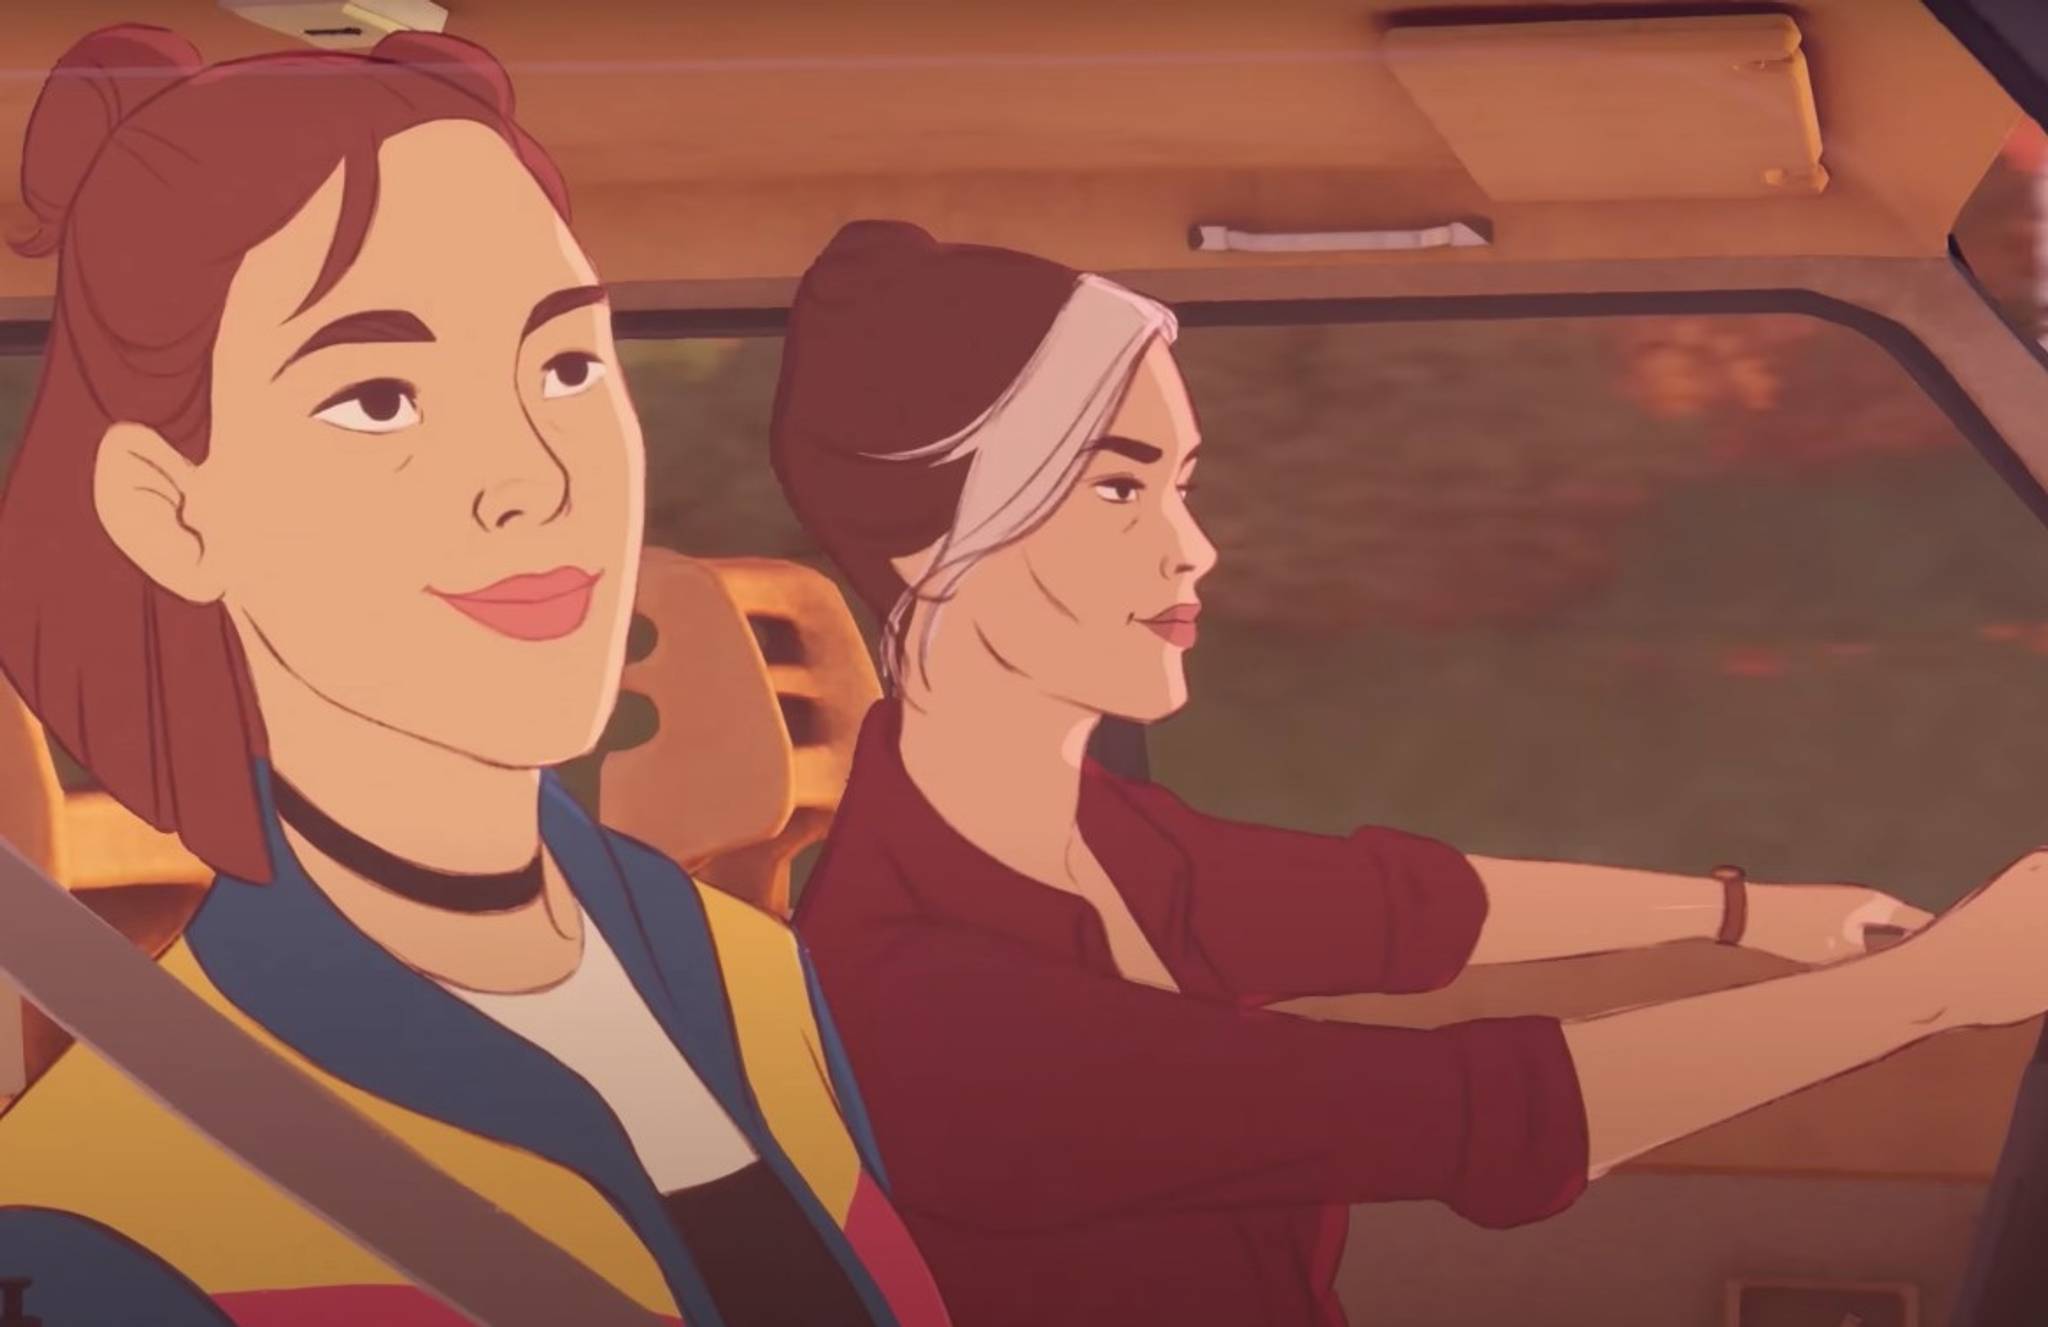 'Open Roads' adds complexity to female-led gaming